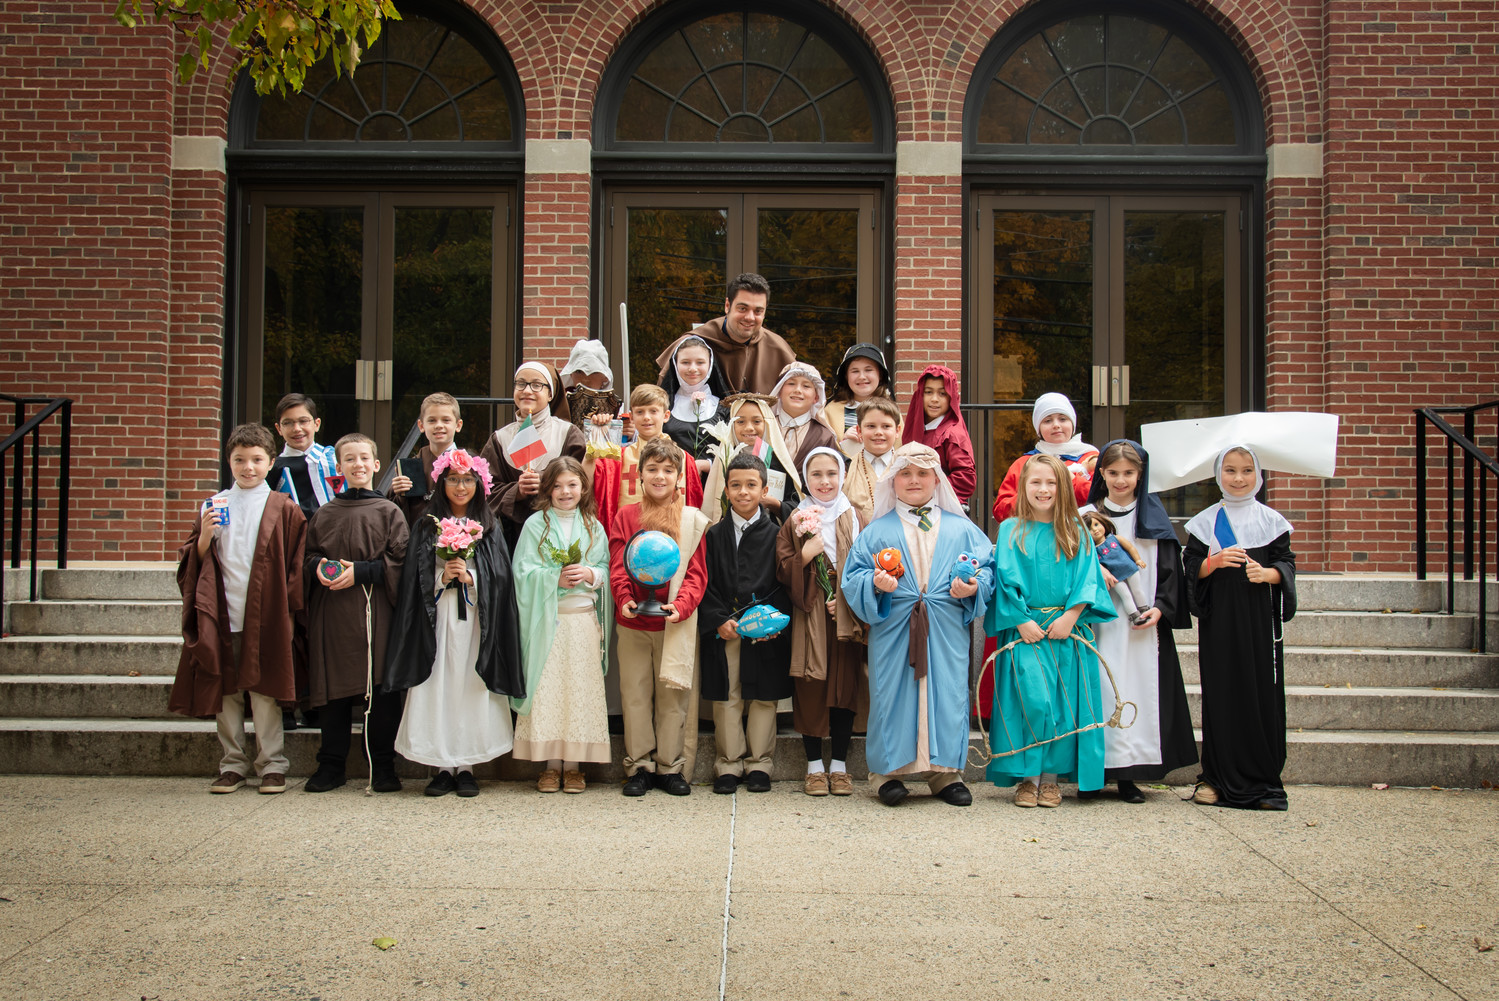 Ralph Cola’s fourth grade class at St. Augustine School recently chose a saint to learn about, and on Thursday, Nov. 1, toured the school in costumes representing their saint and sharing facts and special details.